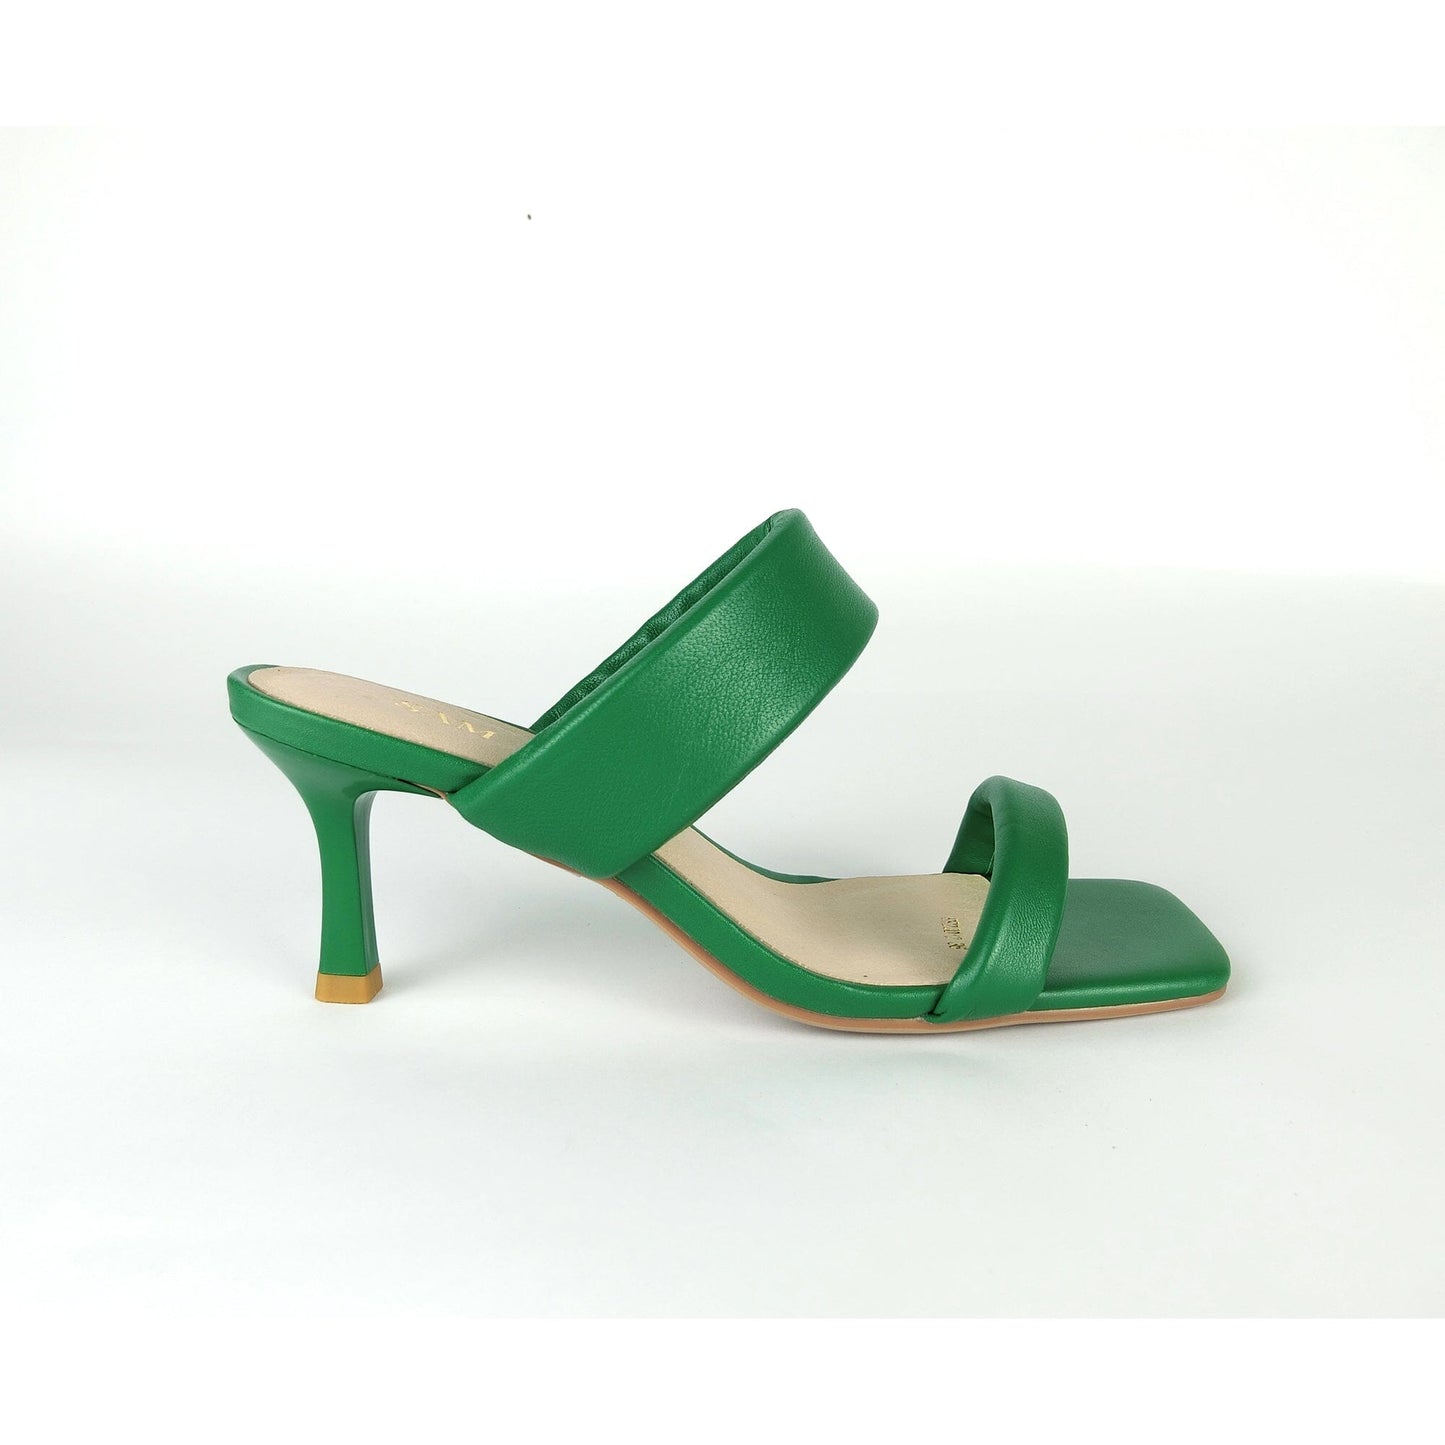 SS22012 Genuine leather puffy straps sandals in Green sandals Sam Star Shoes Green 36/3 